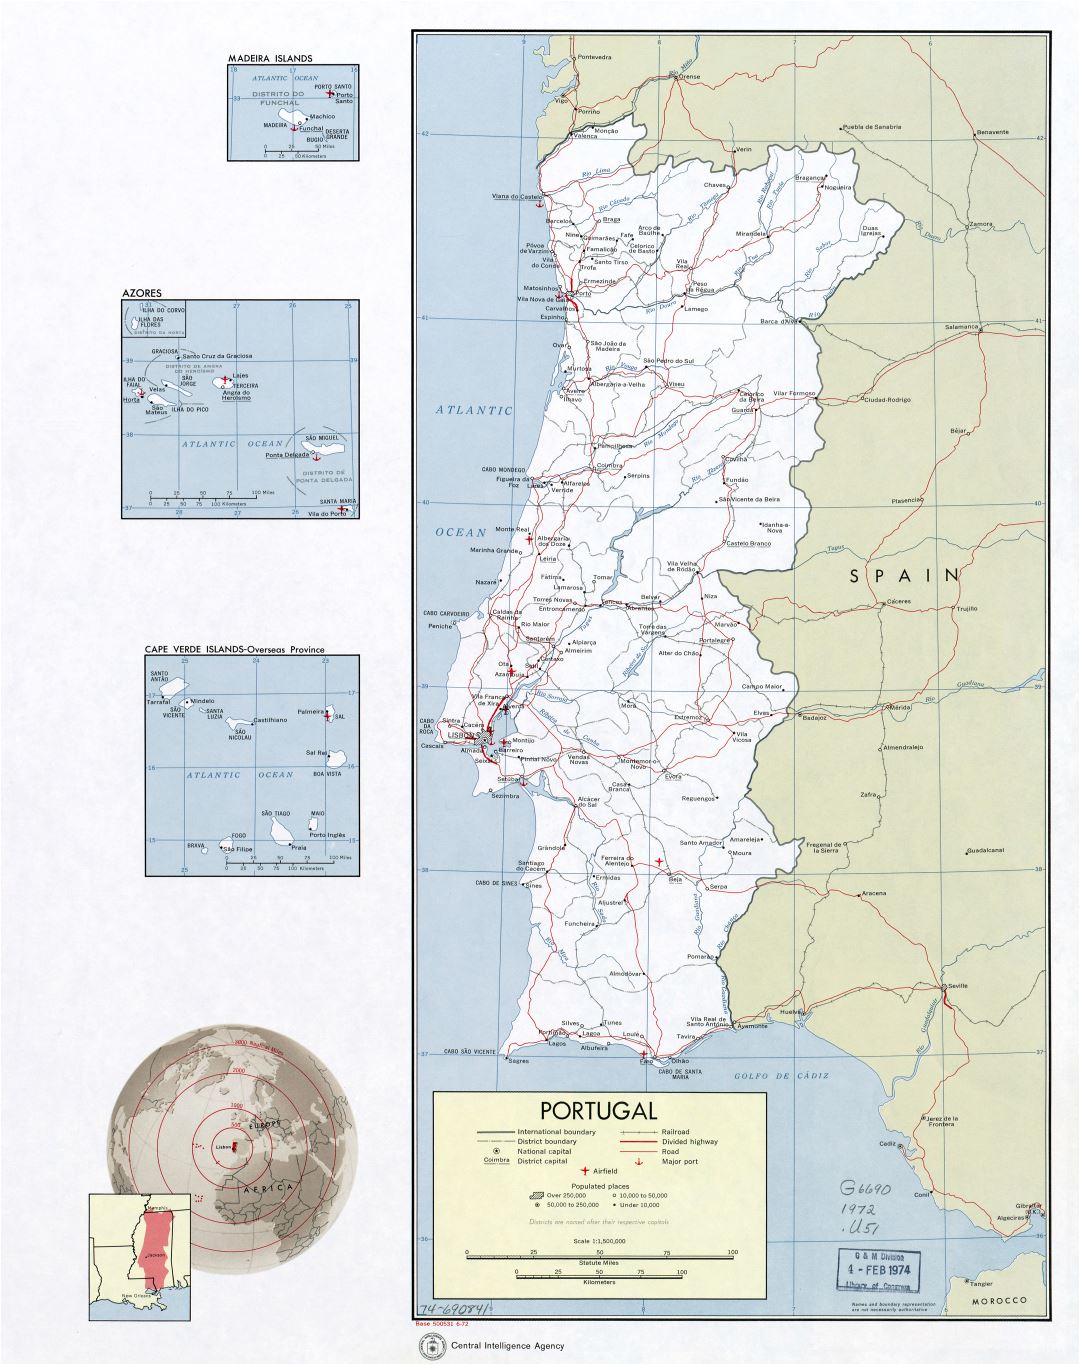 Large scale political and administrative map of Portugal with roads, railroads, major cities, airports and sea ports - 1972